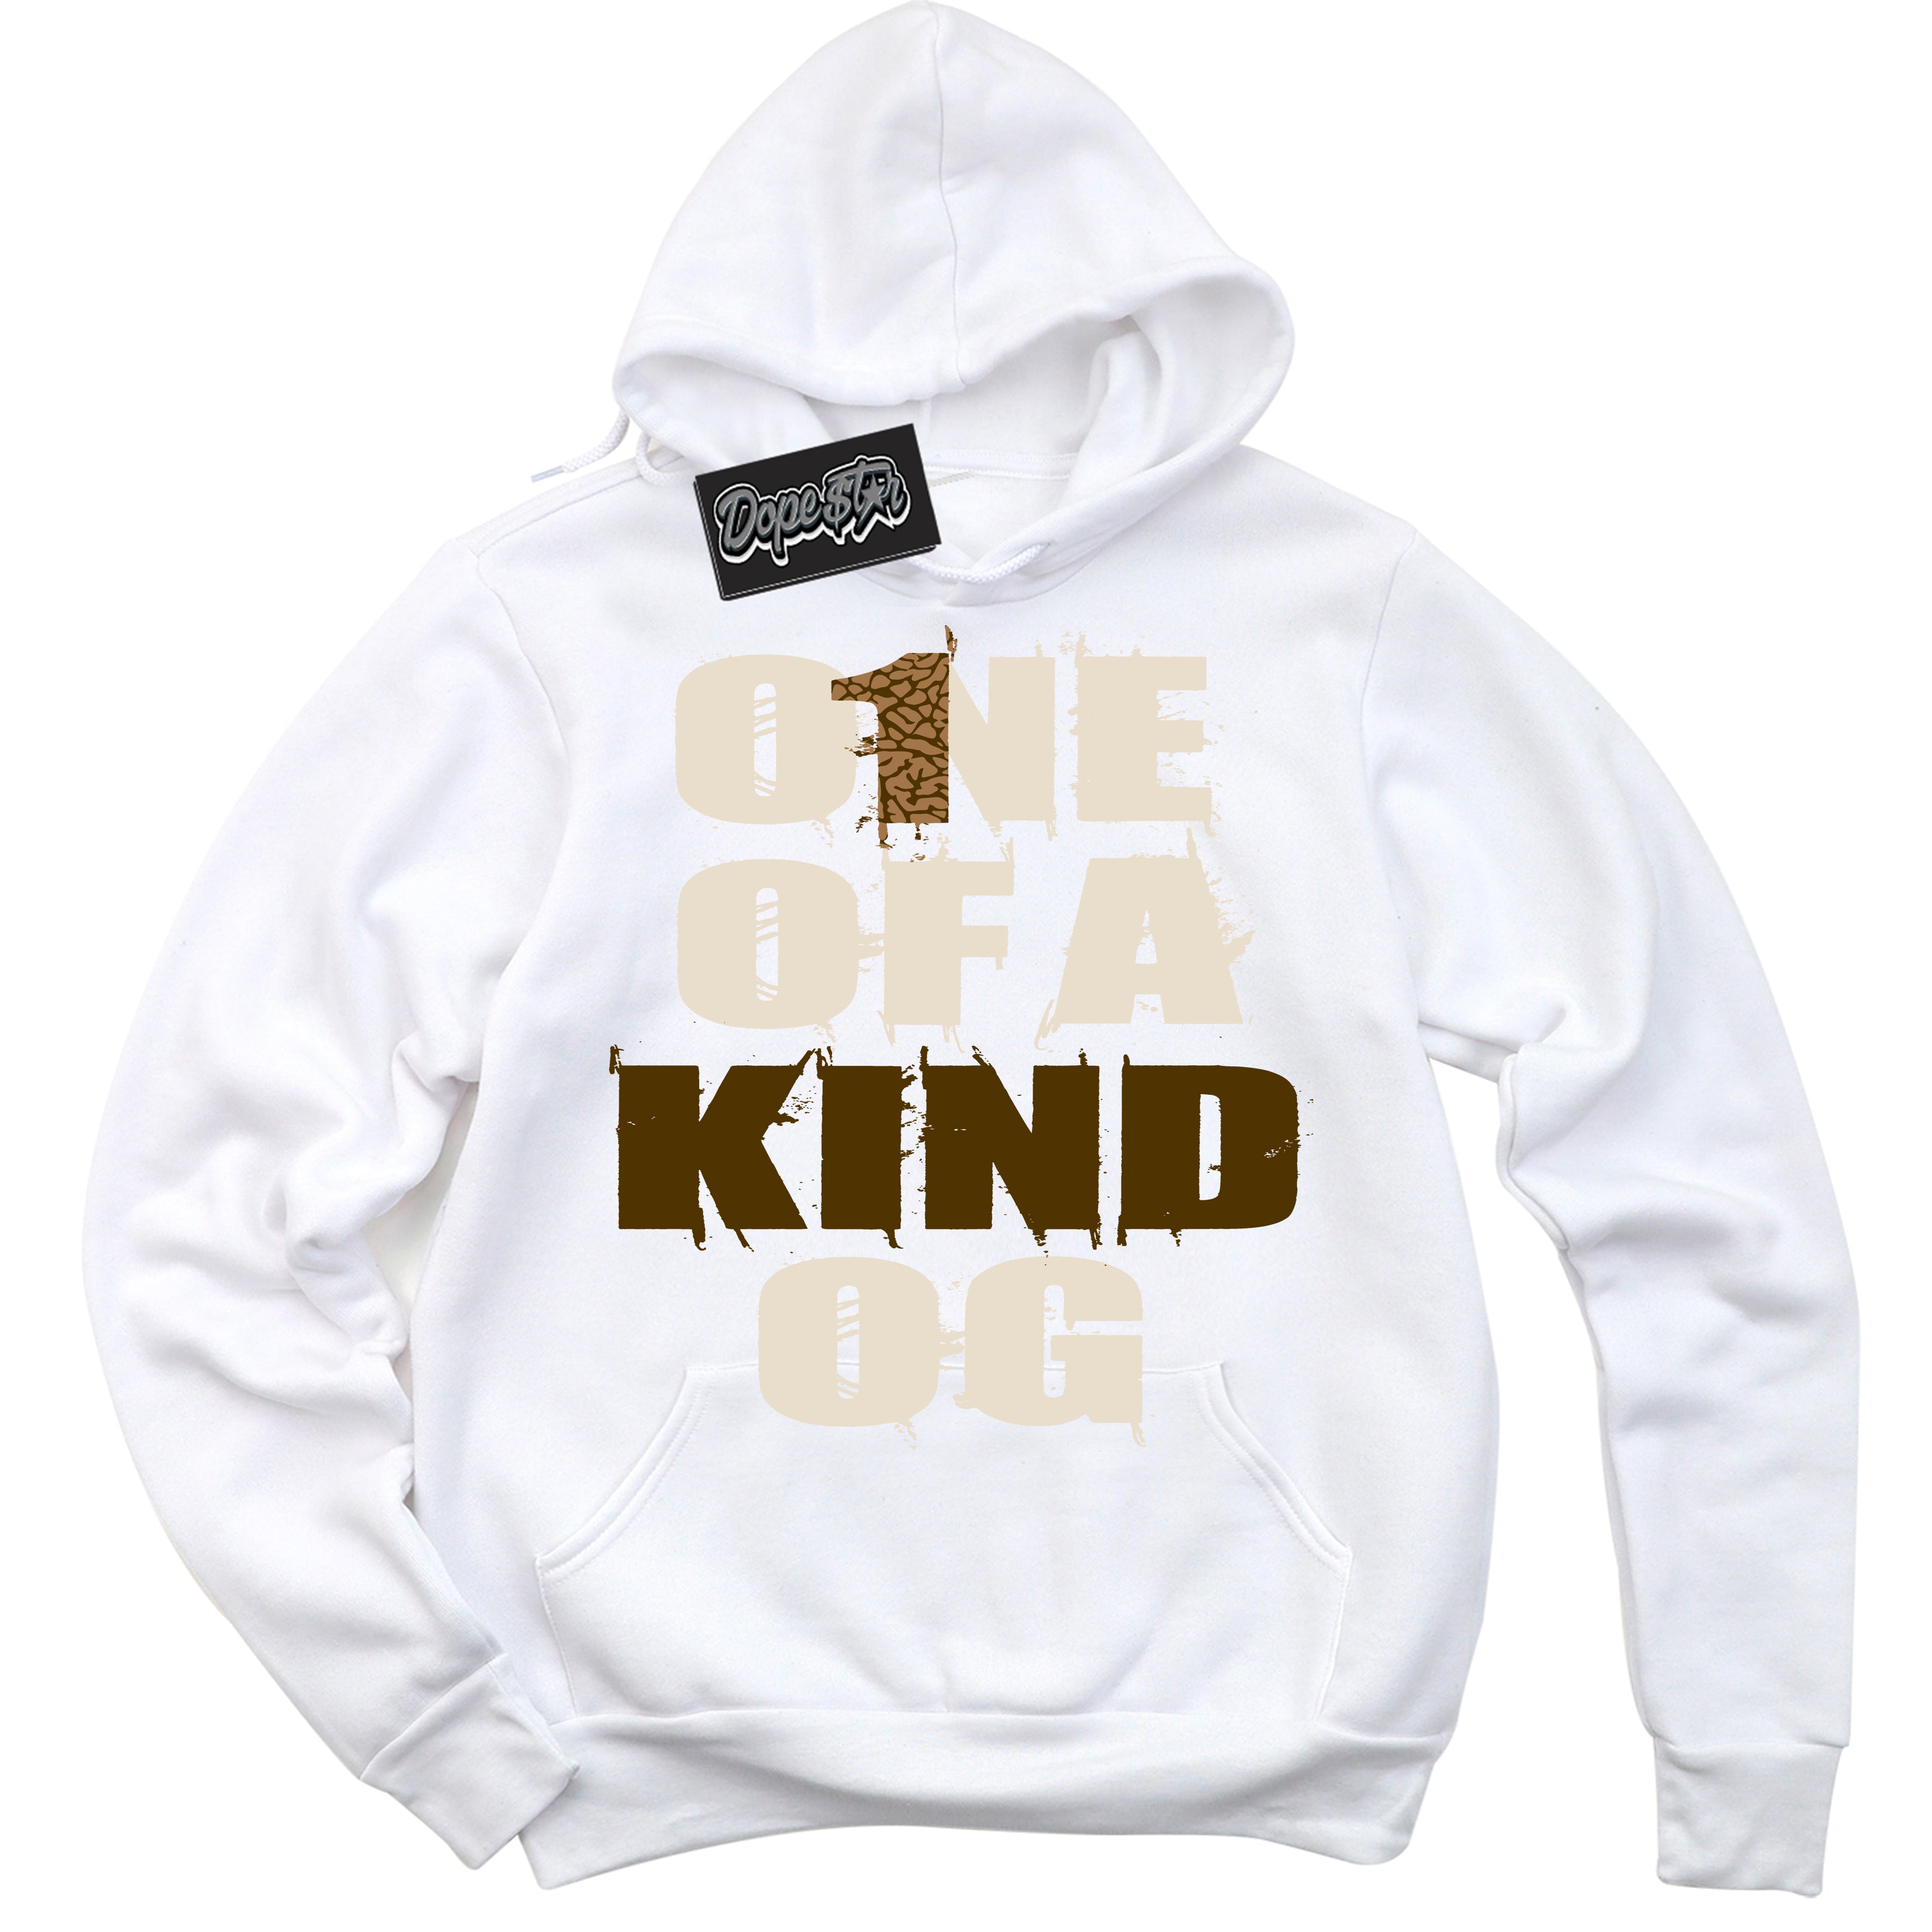 Cool White Graphic DopeStar Hoodie with “ One Of A Kind “ print, that perfectly matches Palomino 3s sneakers